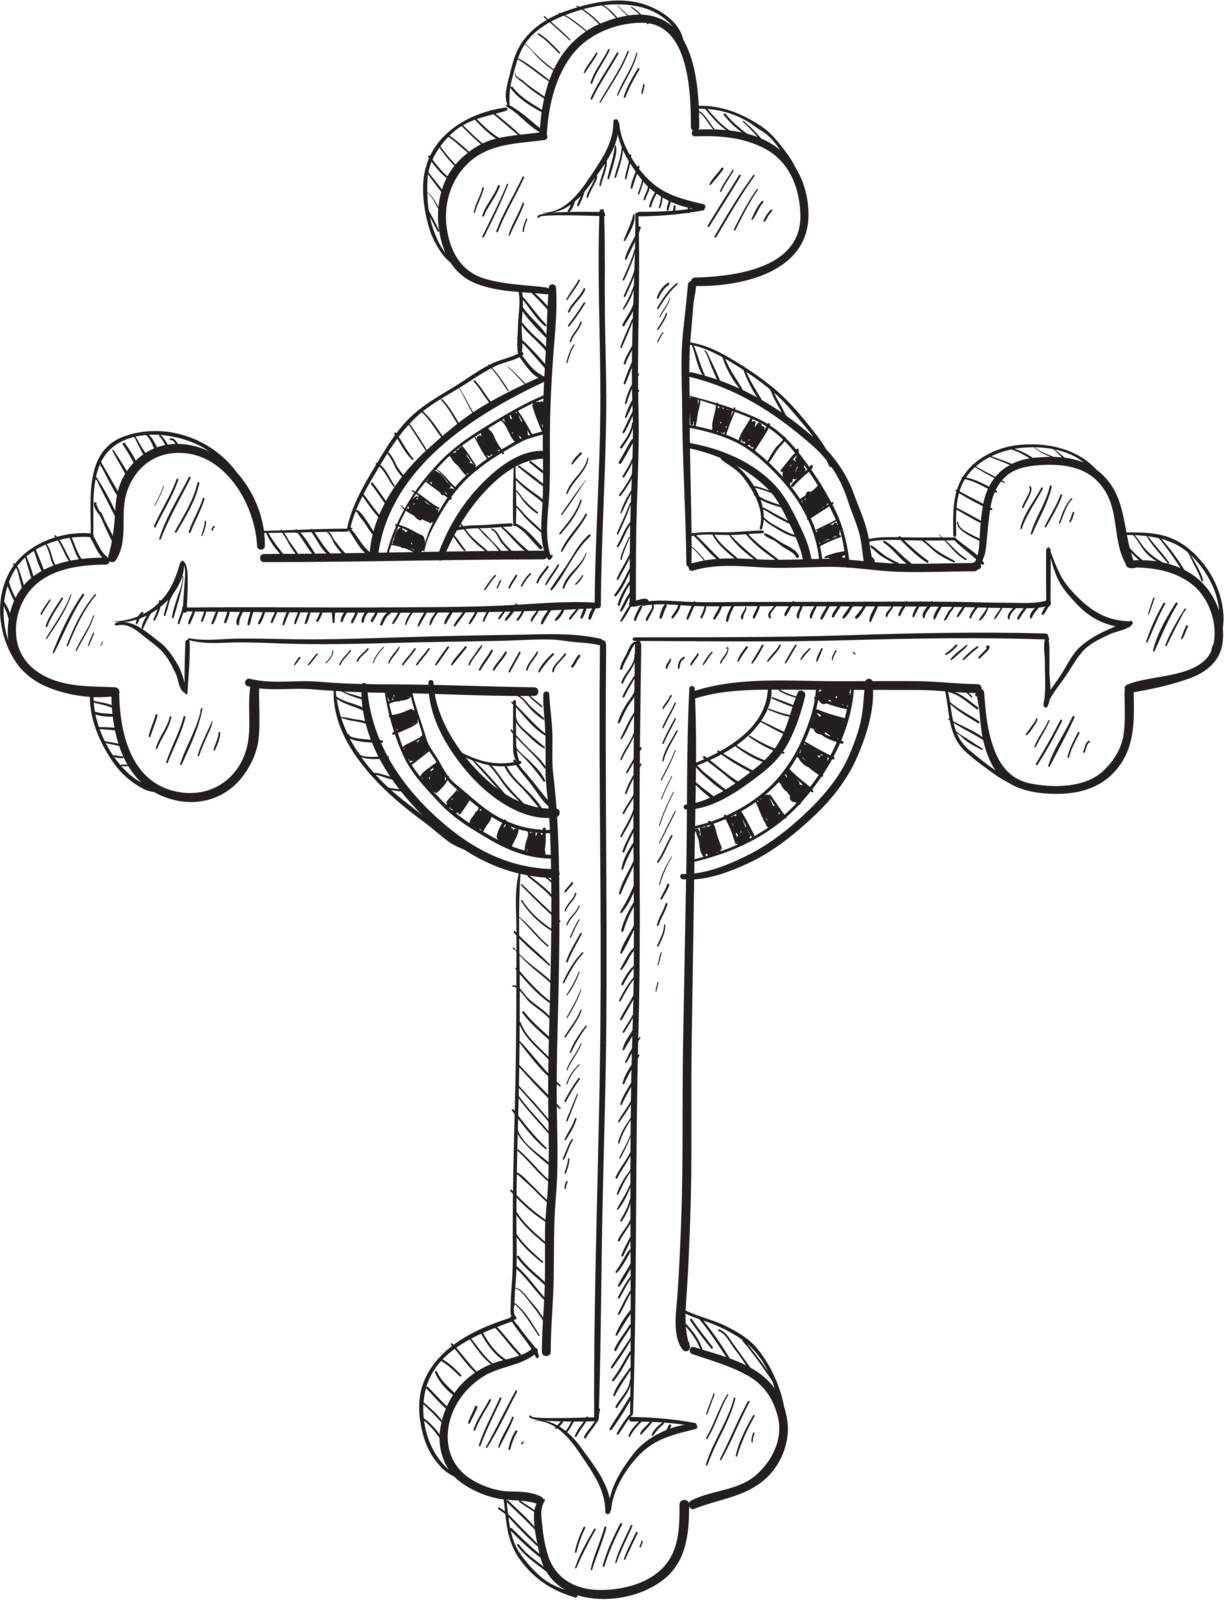 Ornate crucifix sketch by lhfgraphics